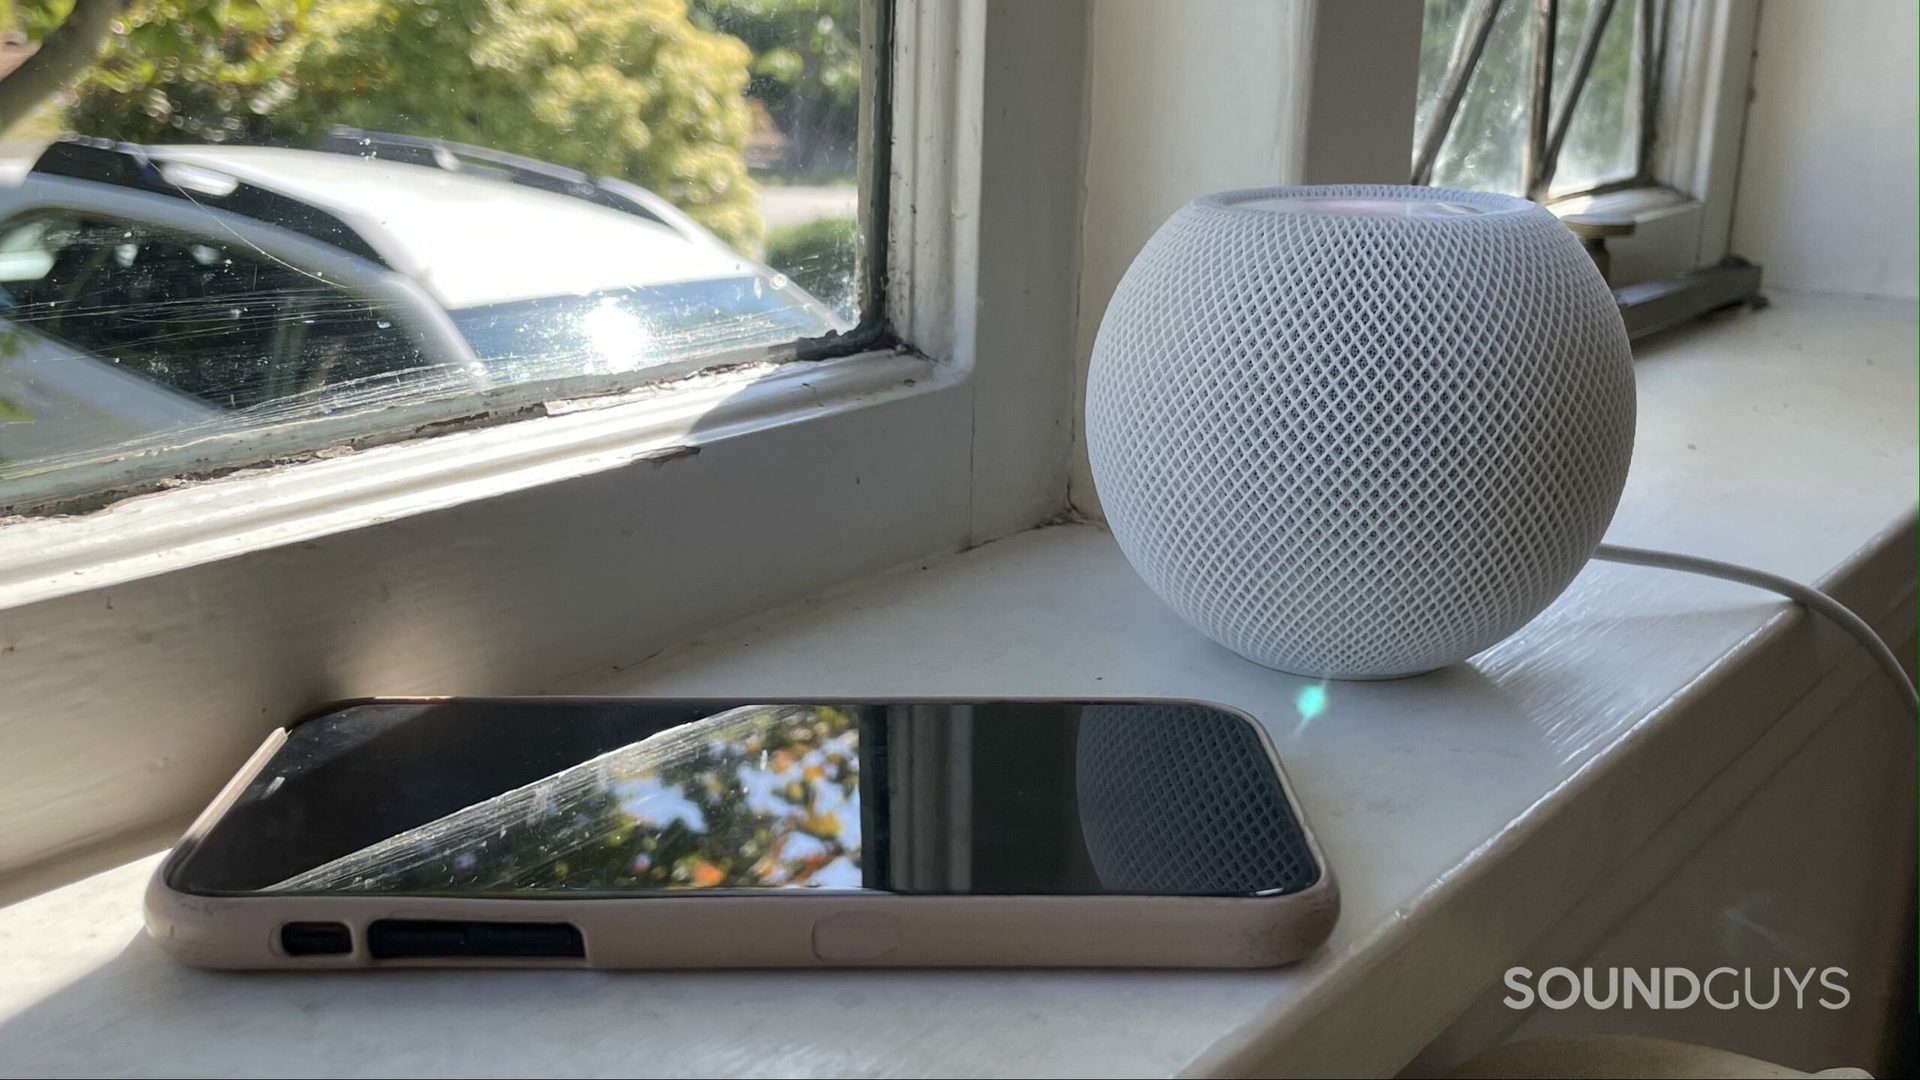 The Apple HomePod mini on a window sill next to an iPhone.